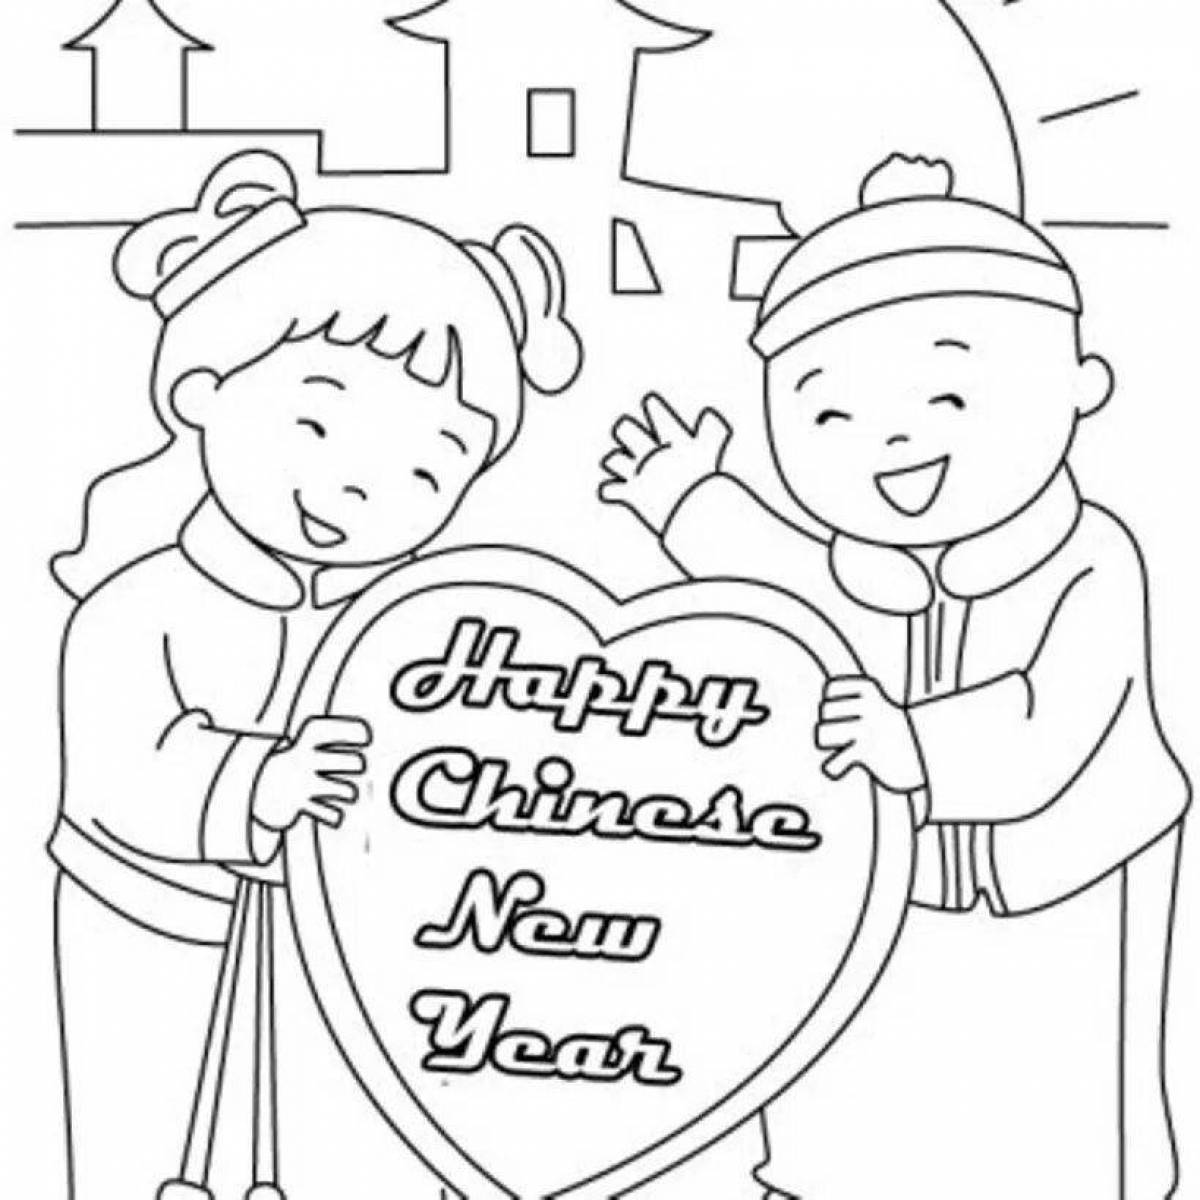 Chinese New Year coloring book